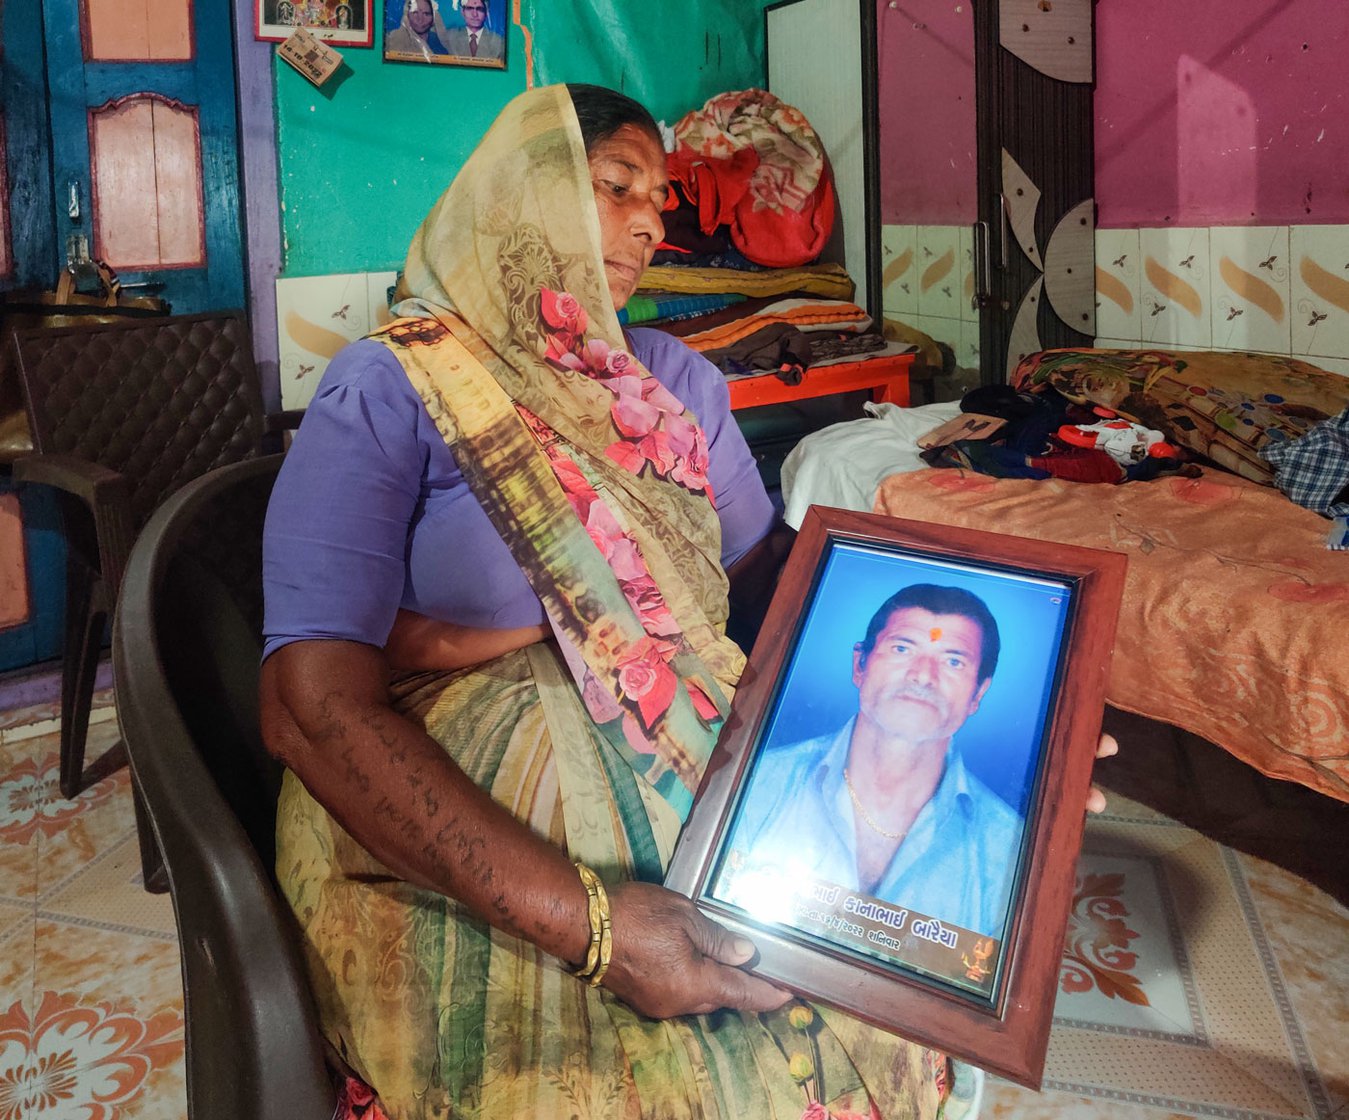 Gabhiben holding a portrait of her late husband, Jeevanbhai, at their home in Jafrabad, a coastal town in Gujarat’s Amreli district